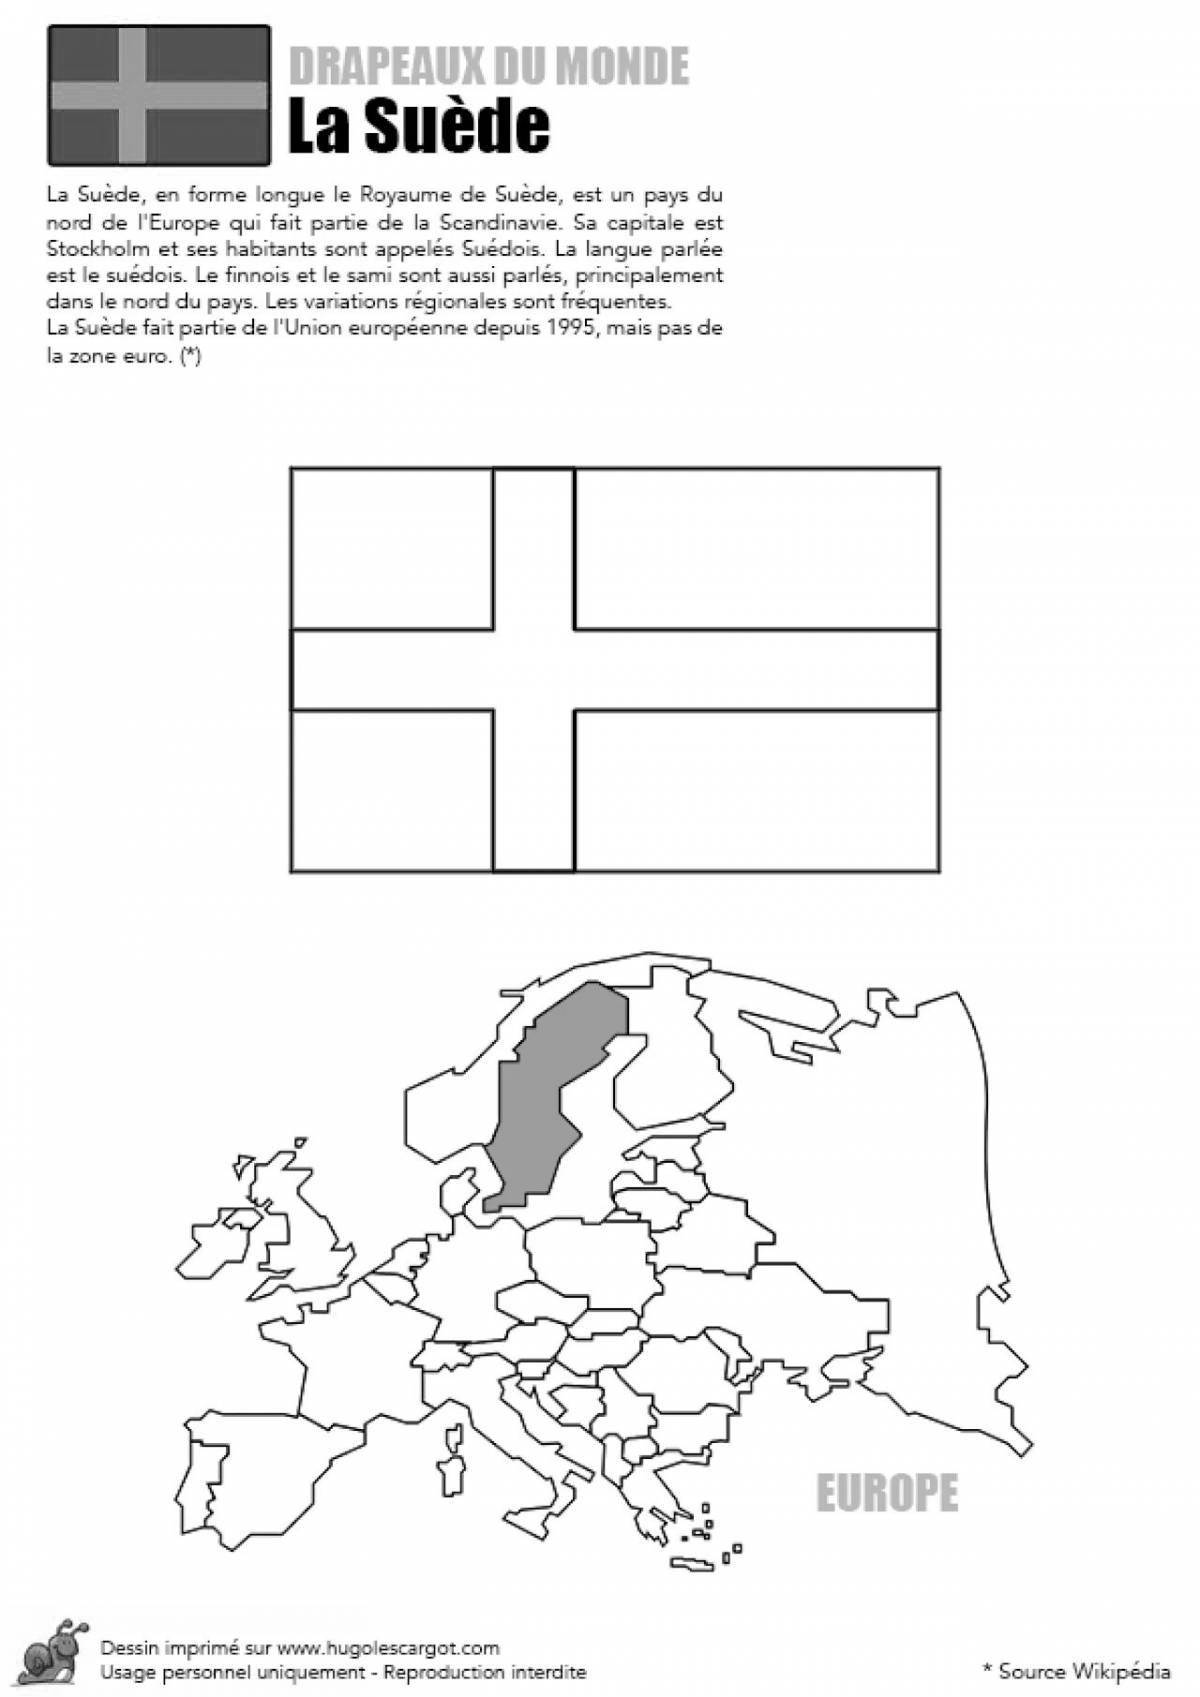 Exciting sweden flag coloring page